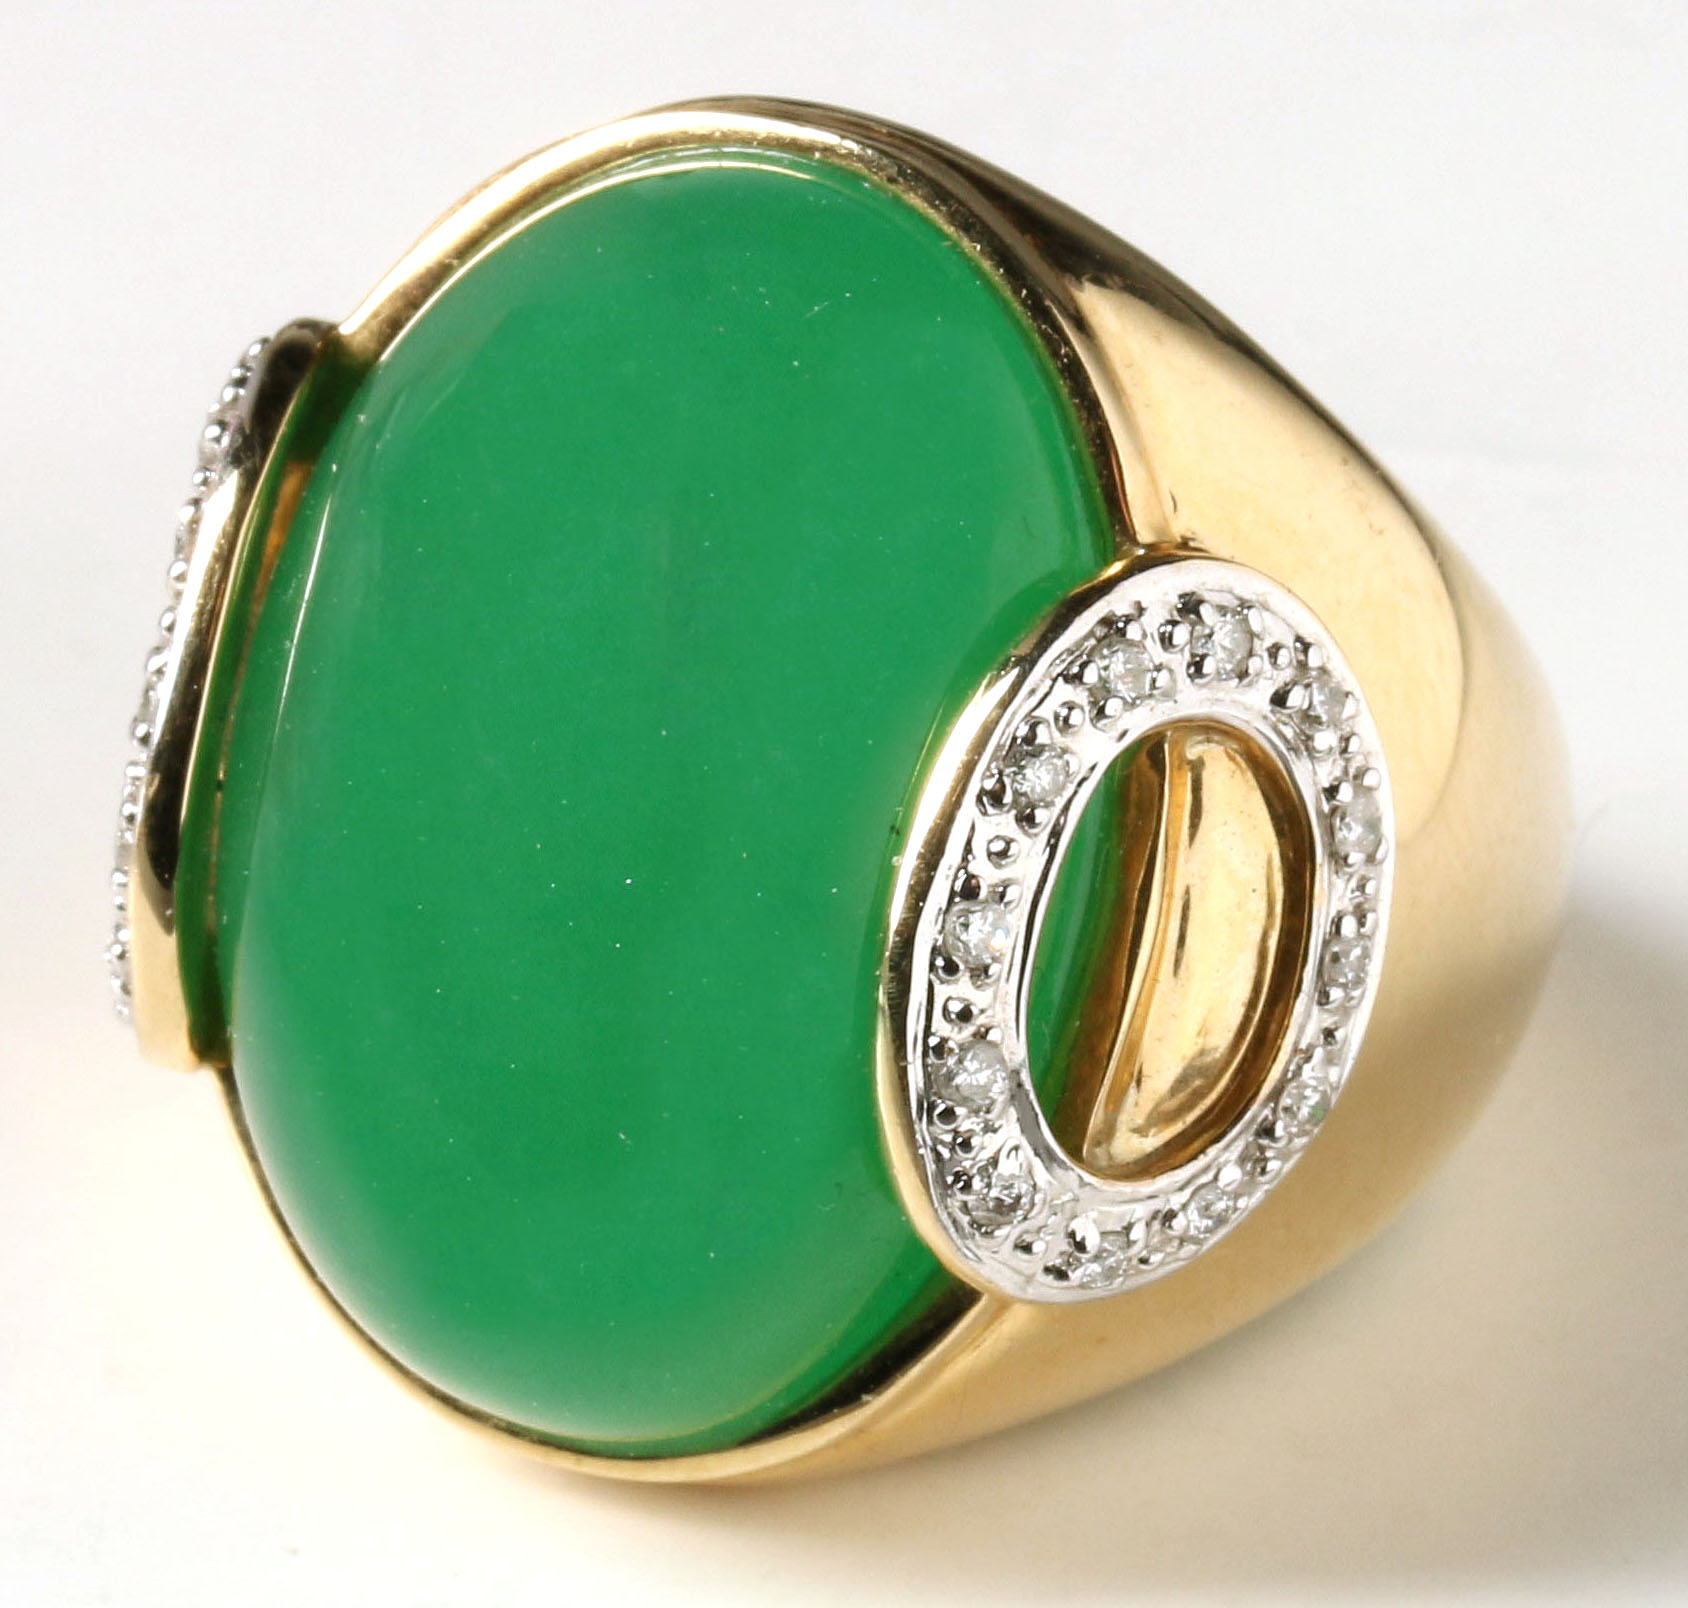 A GENT'S 14K CHALCEDONY CABOCHON RING WITH DIAMOND